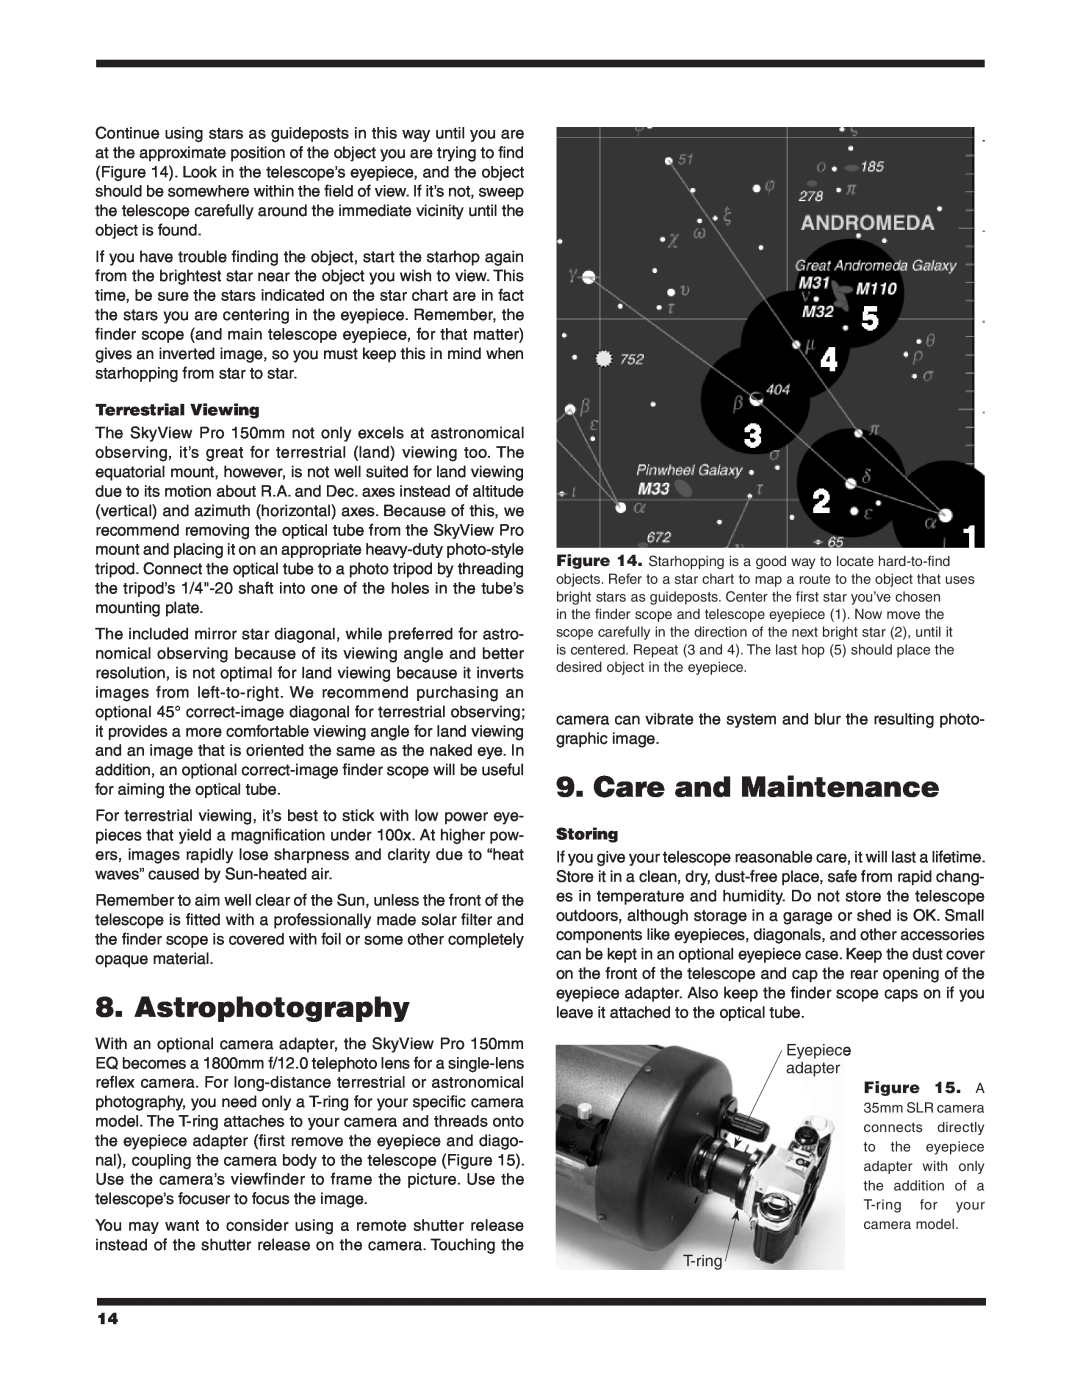 Orion 9968 instruction manual Astrophotography, Care and Maintenance, Terrestrial Viewing, Storing 